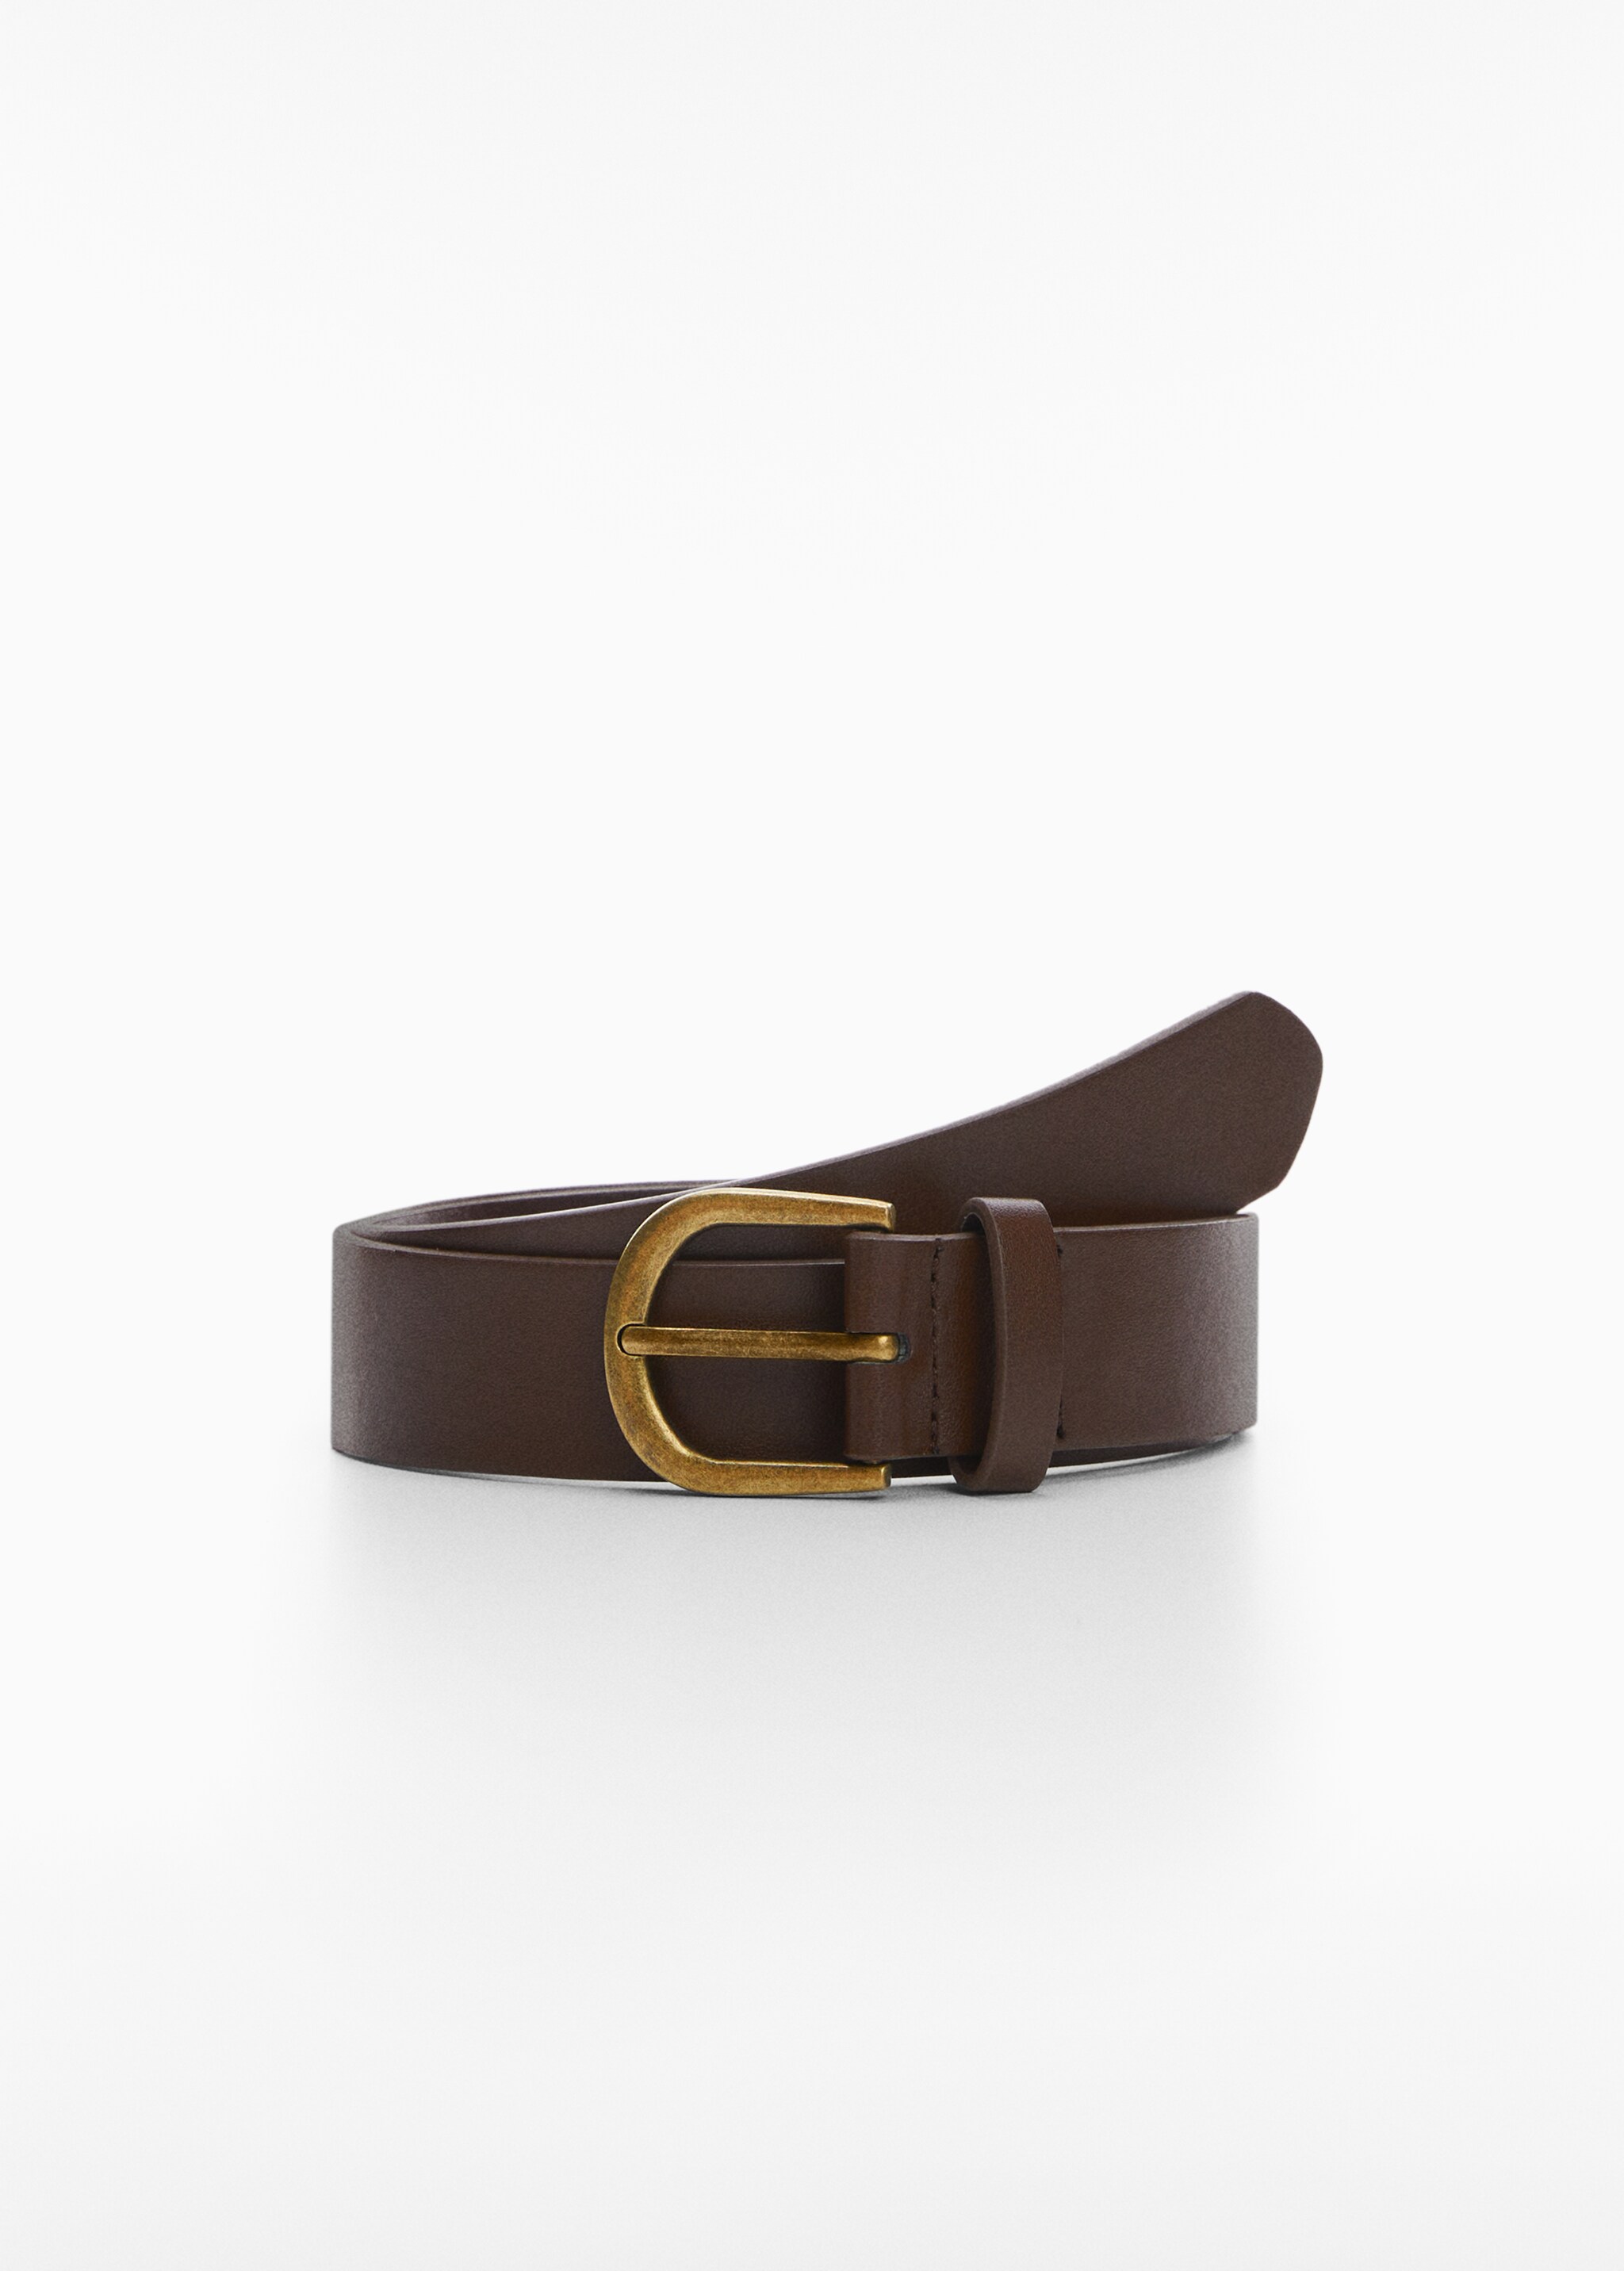 Buckle belt - Article without model